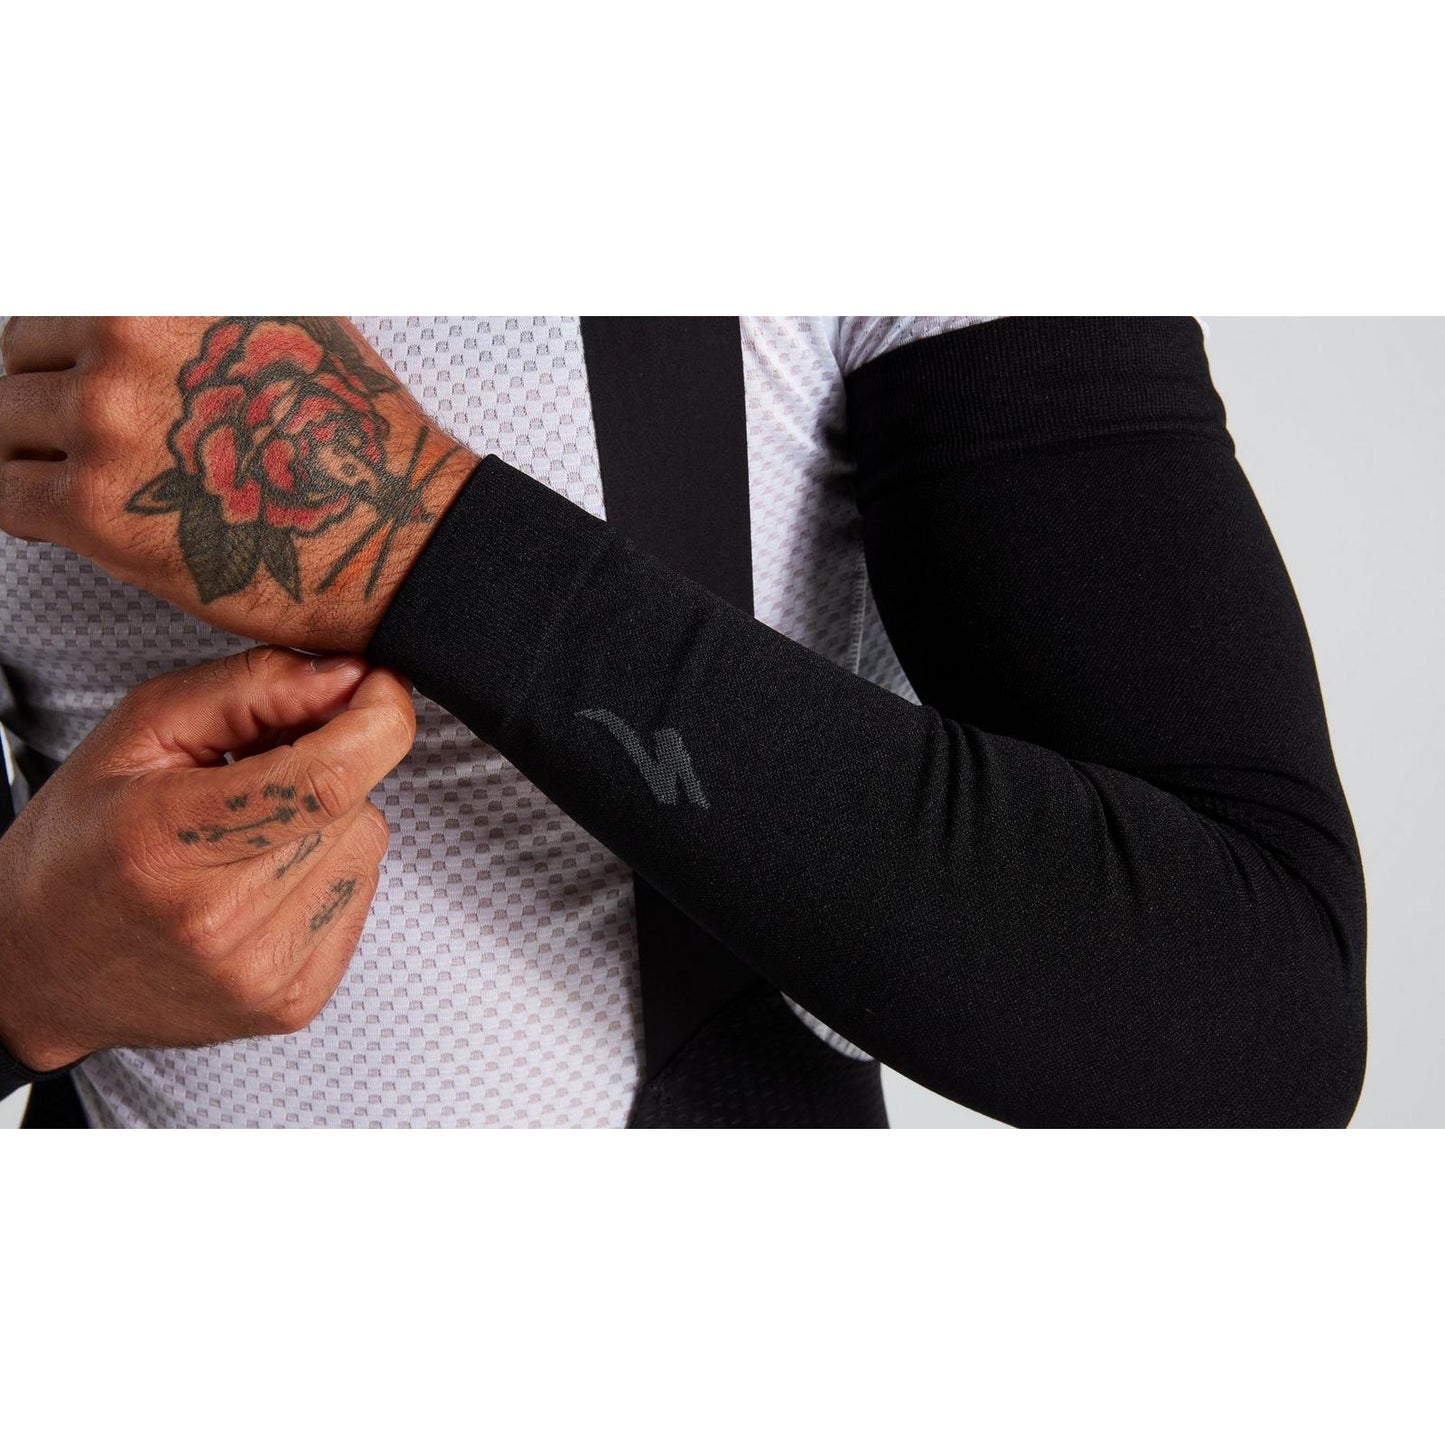 Specialized Seamless UV Arm Covers - Arm covers - Bicycle Warehouse